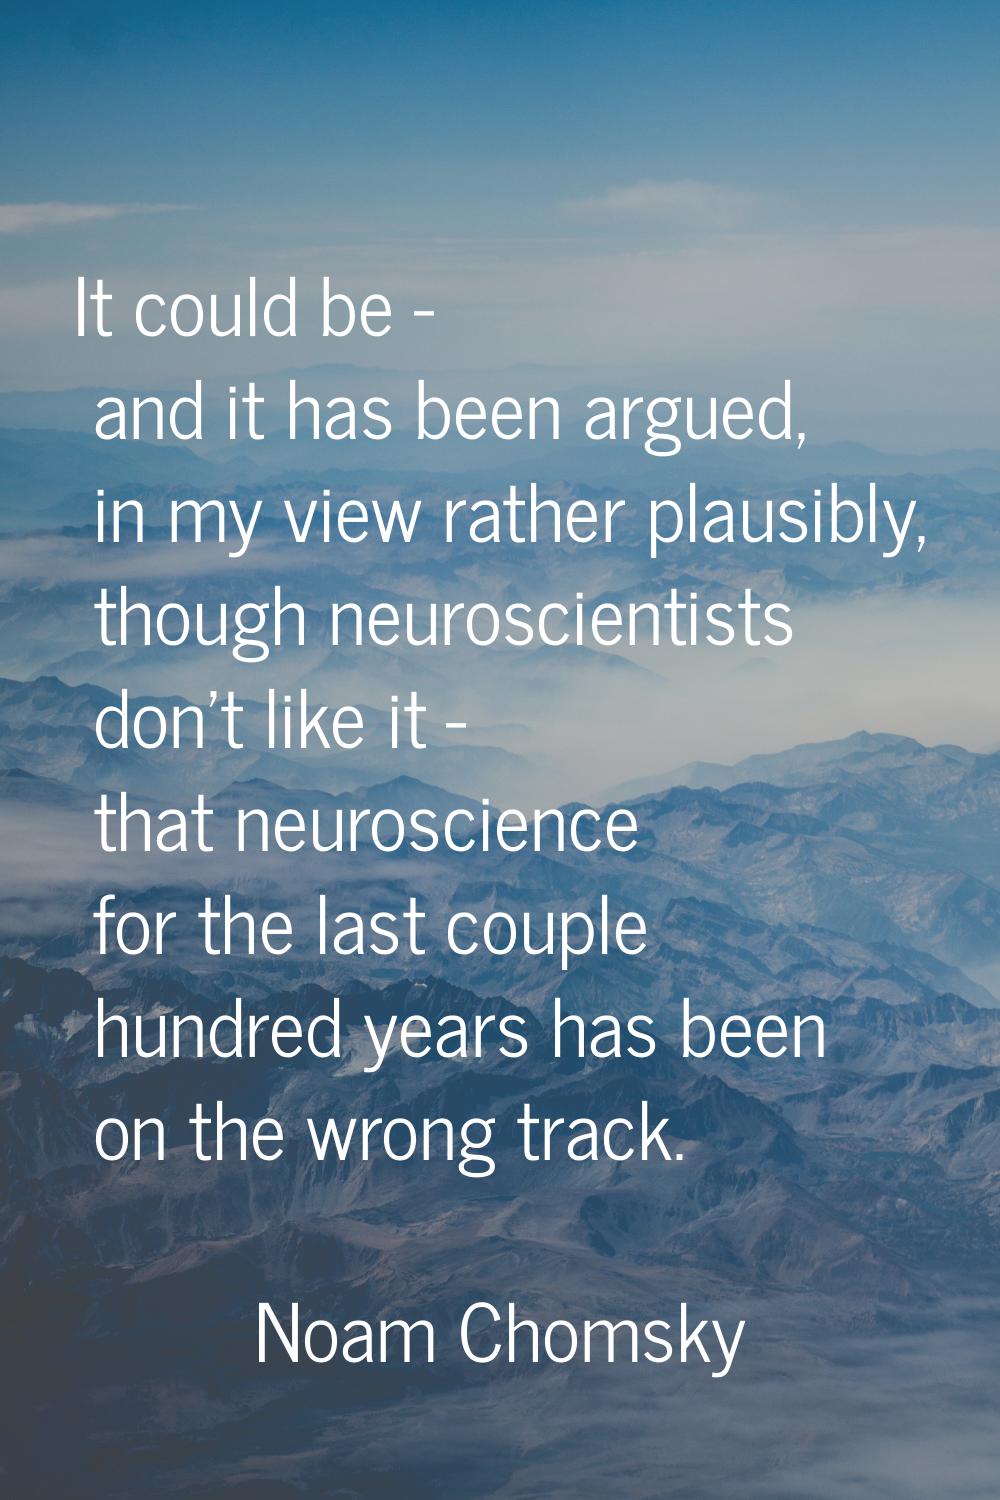 It could be - and it has been argued, in my view rather plausibly, though neuroscientists don't lik